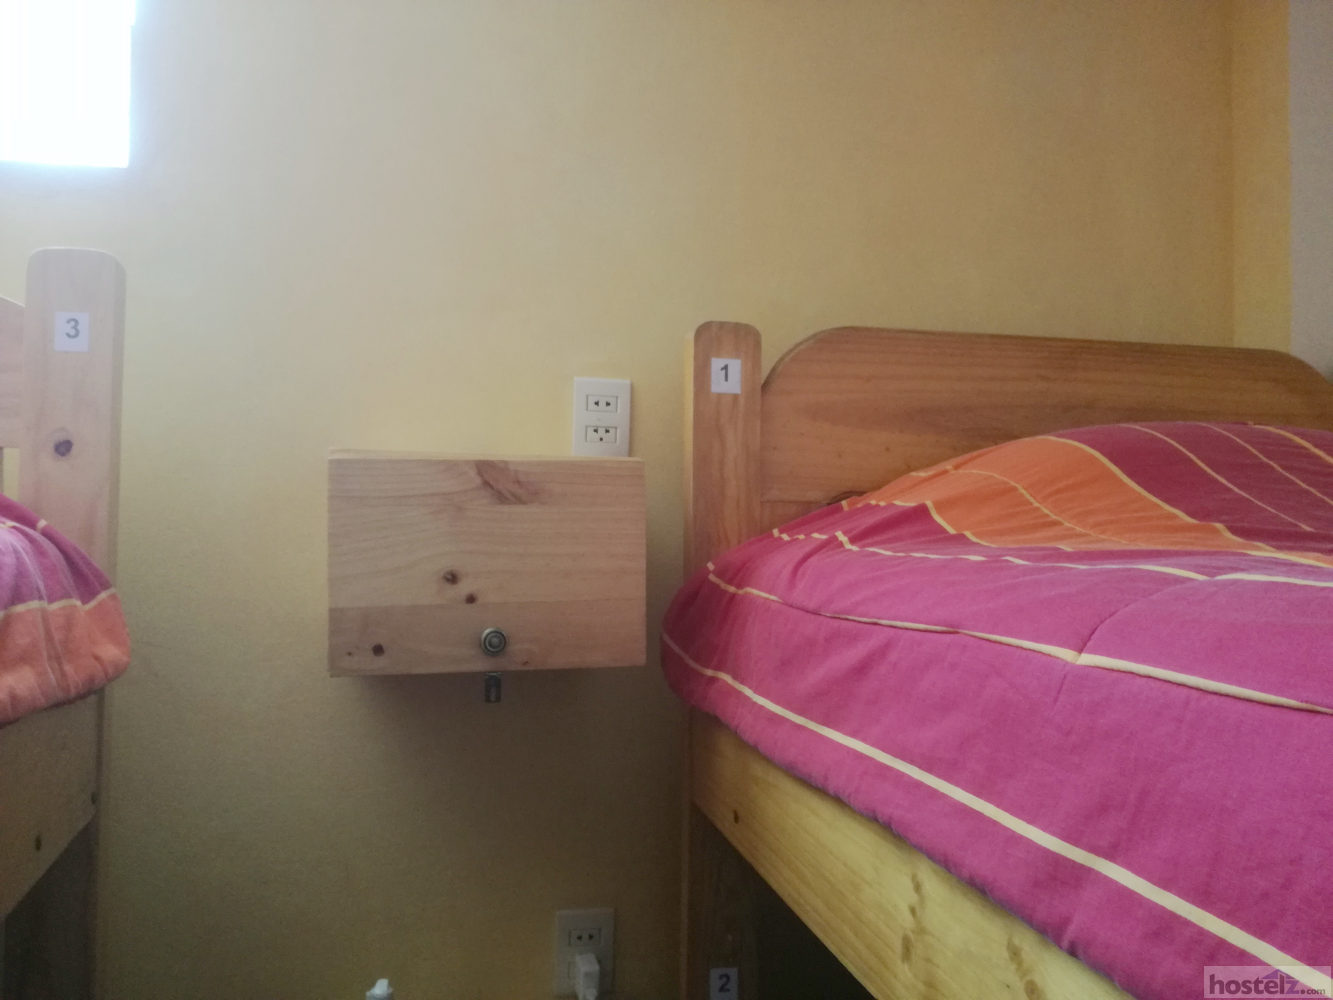 Small locker next to each bed with small hole to charge electronics